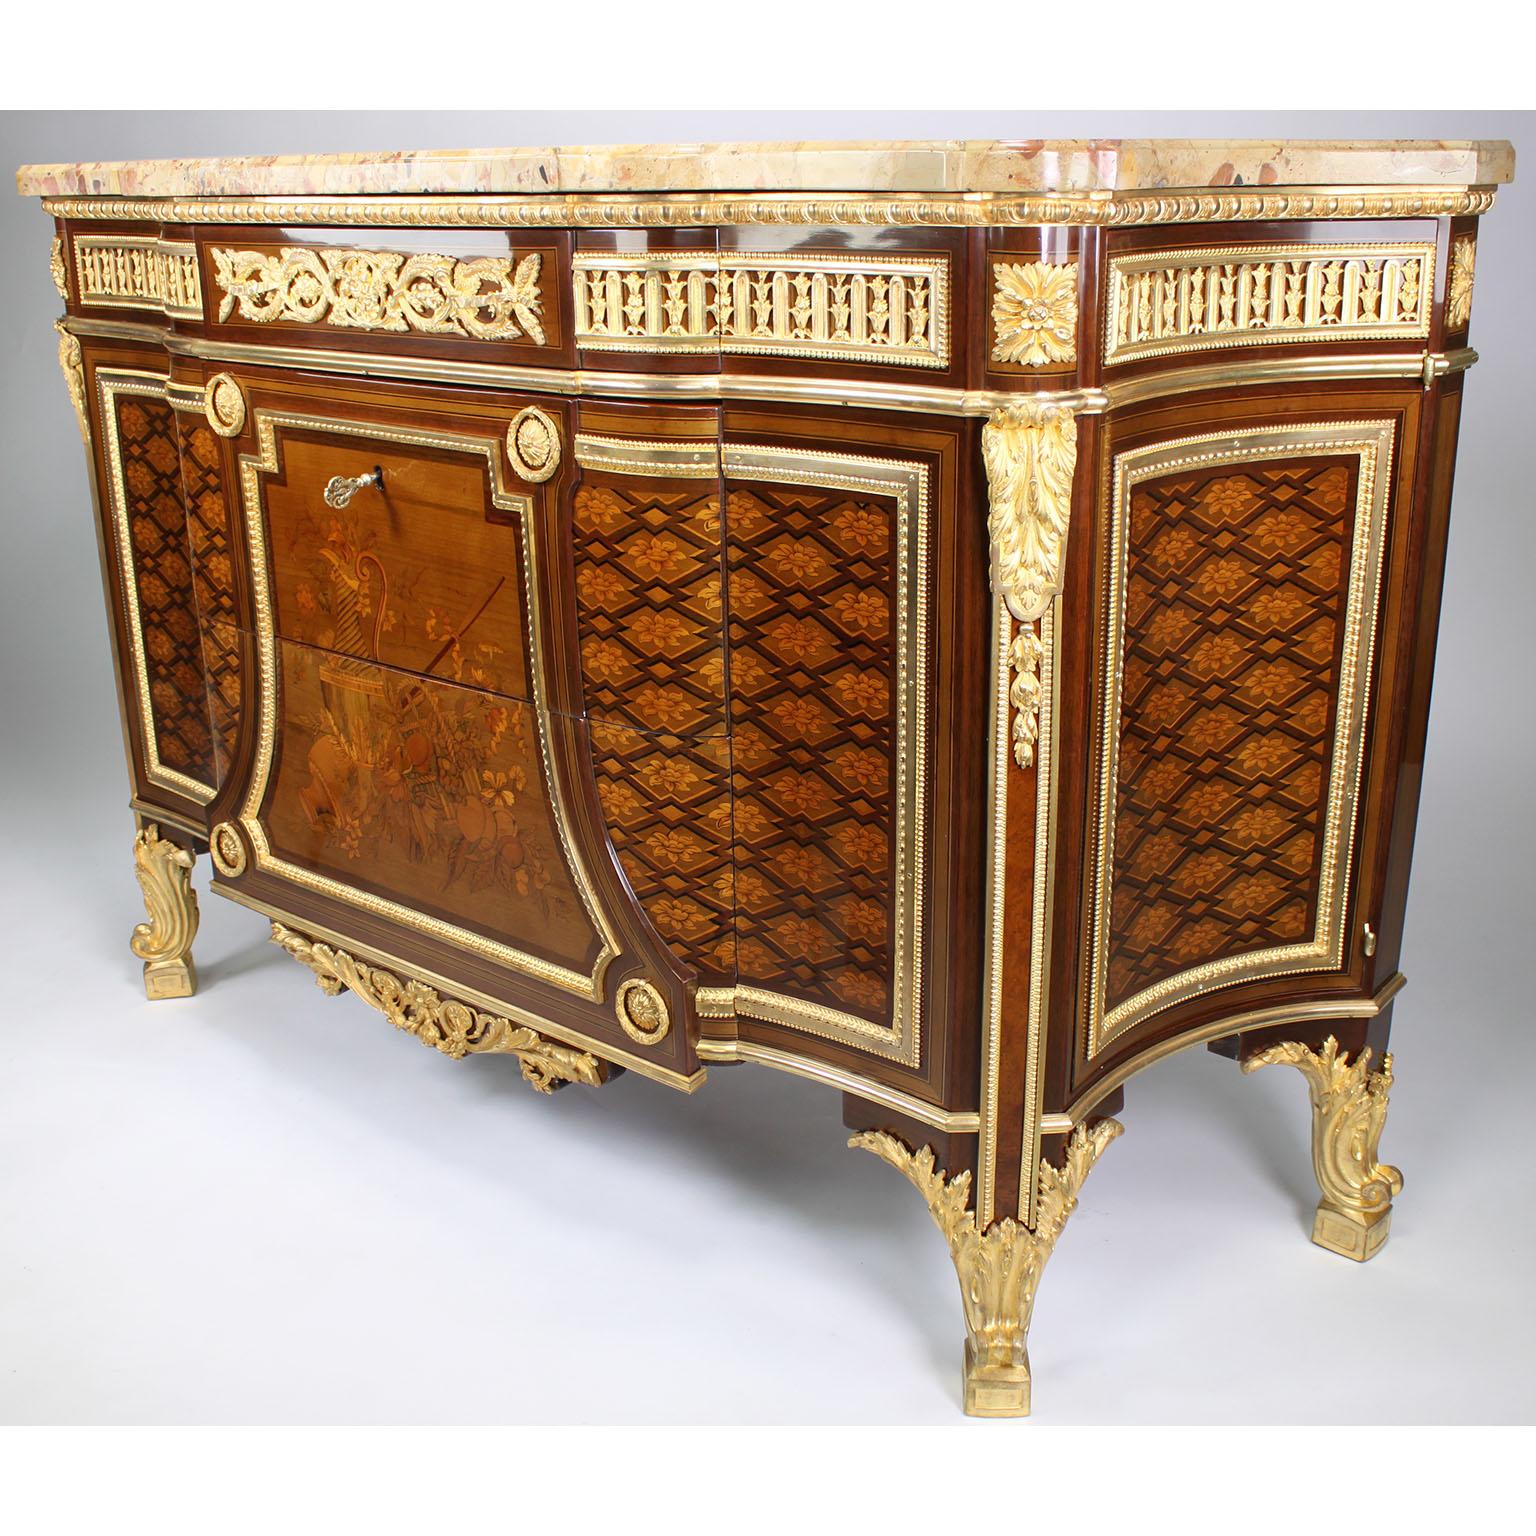 A Very Fine French 19th Century Louis XVI-Louis XVI Transition Style Ormolu-Mounted Mahogany, Birdseye Maple, Fruitwood and Sycamore Marquetry and Parquetry Commode with a Brèche d'Alep Marble-Top, after the model by Jean-Henri Riesener (1734-1806).